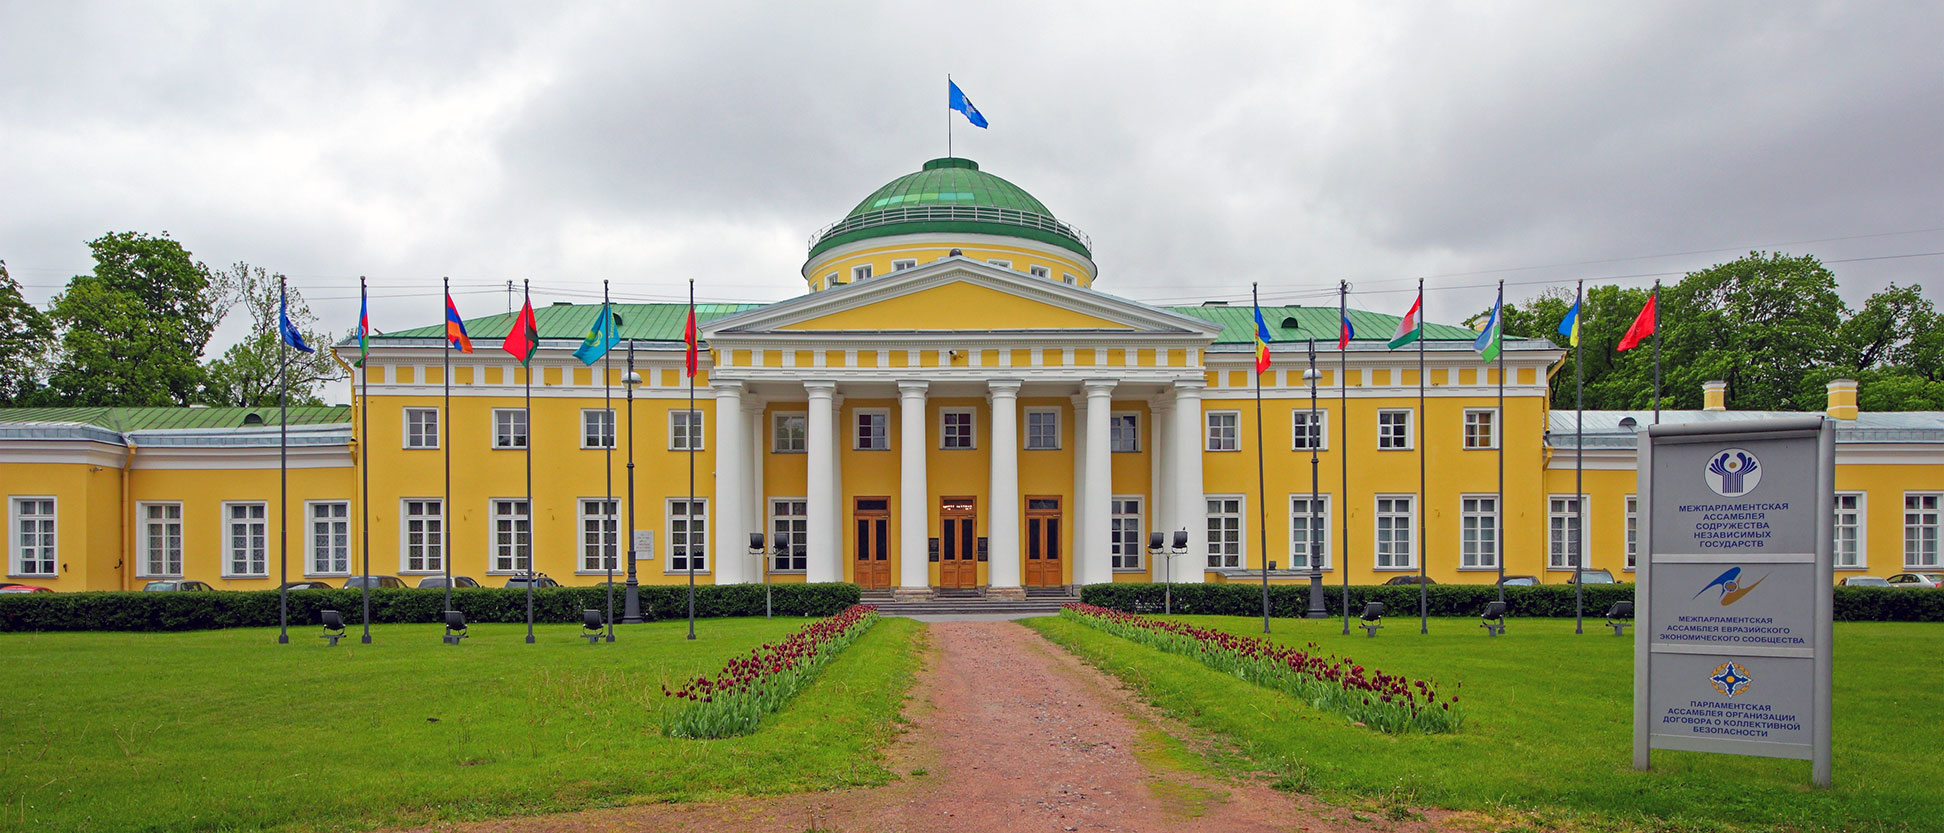 Tauride Palace in St. Petersburg, Russia